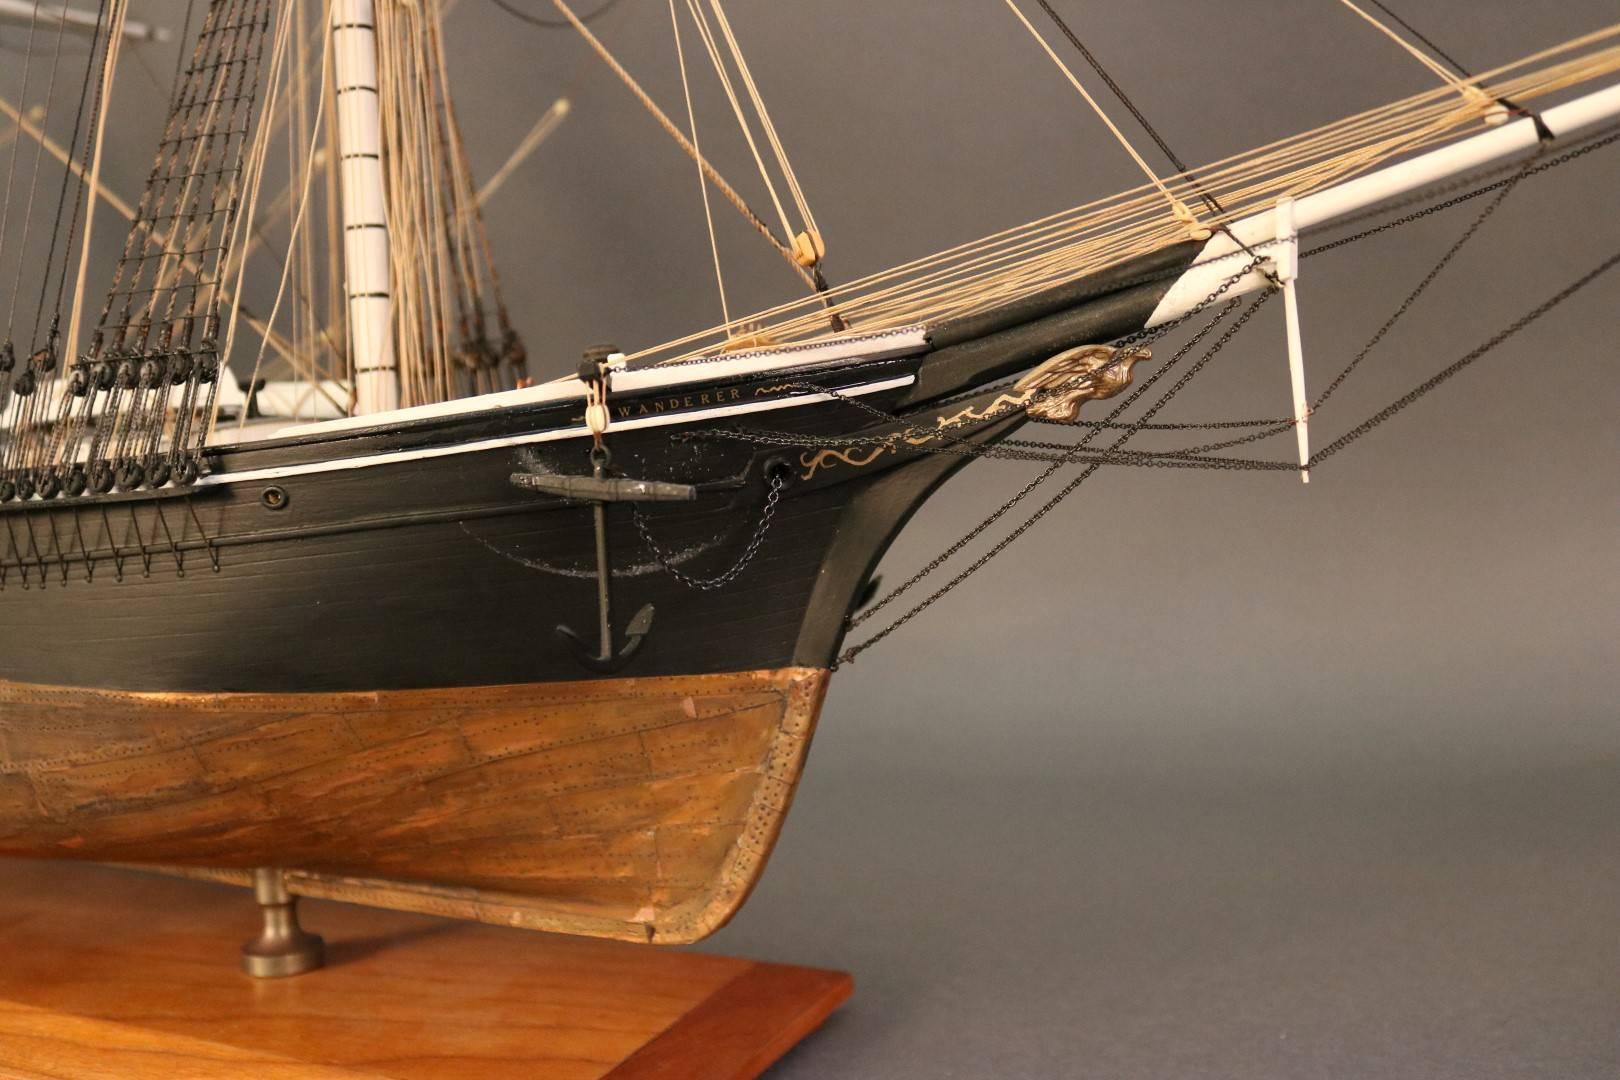 A 19th century sailing barque by William Hitchcock, with solid wood hull and copper sheathing. "Wanderer" in gold lettering on side.

Overall dimensions: 33" x 9" x 24".